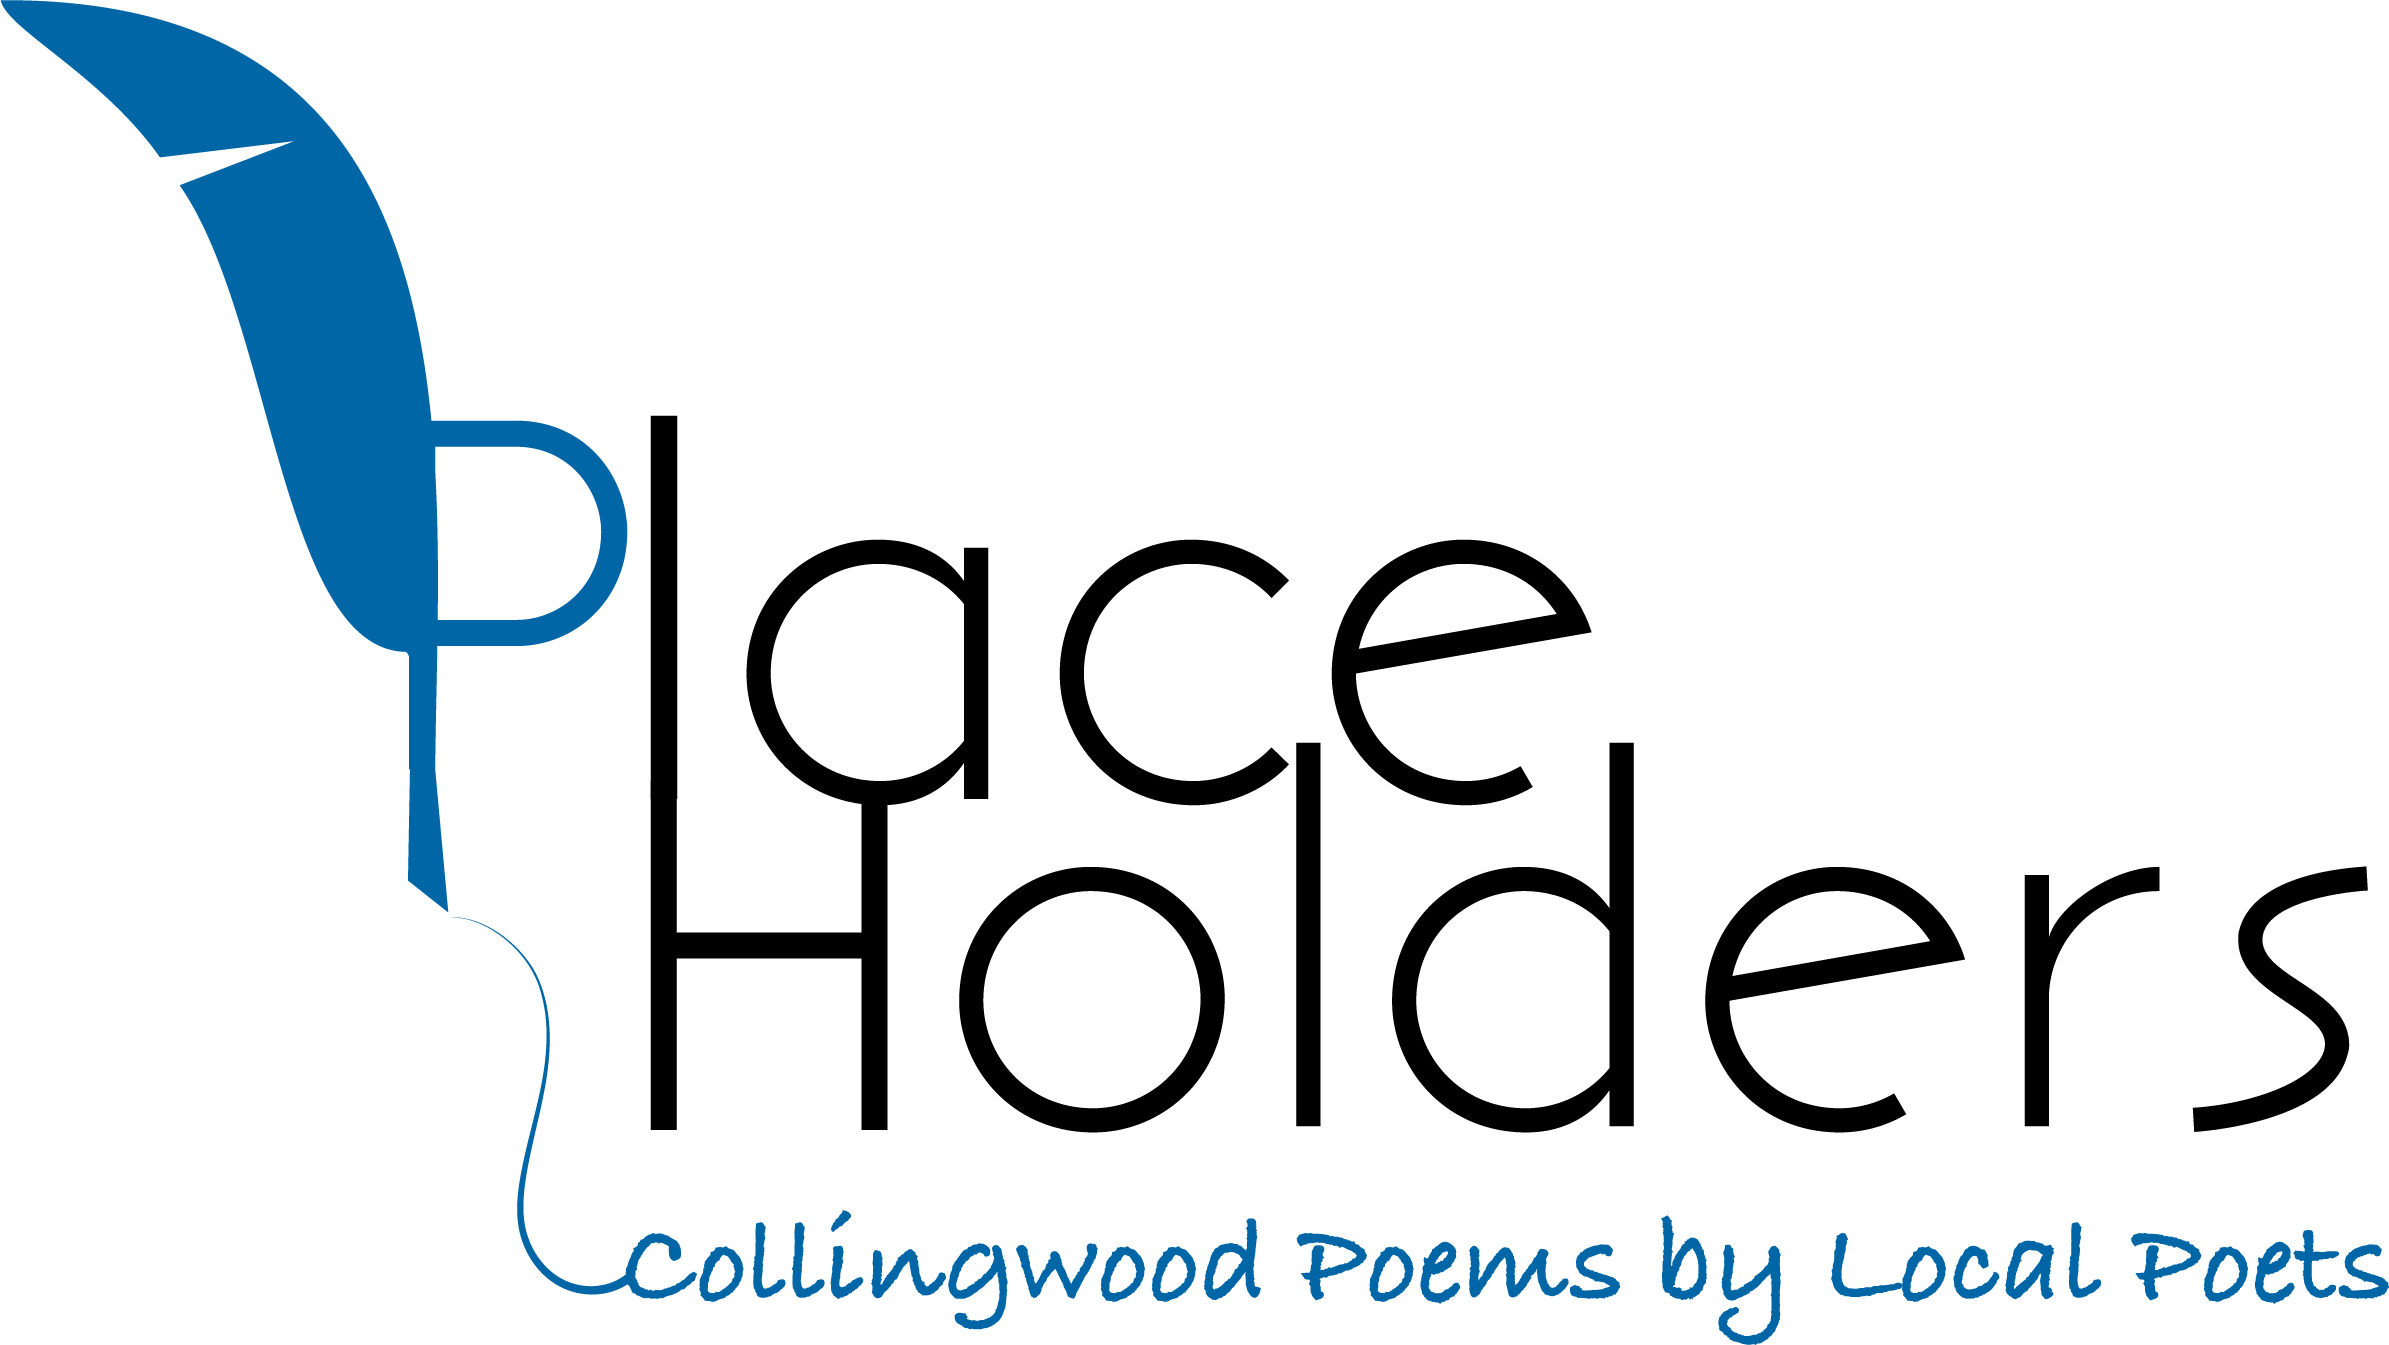 Feather Quill with the words Place Holders, Collingwood Poems by Local Poets